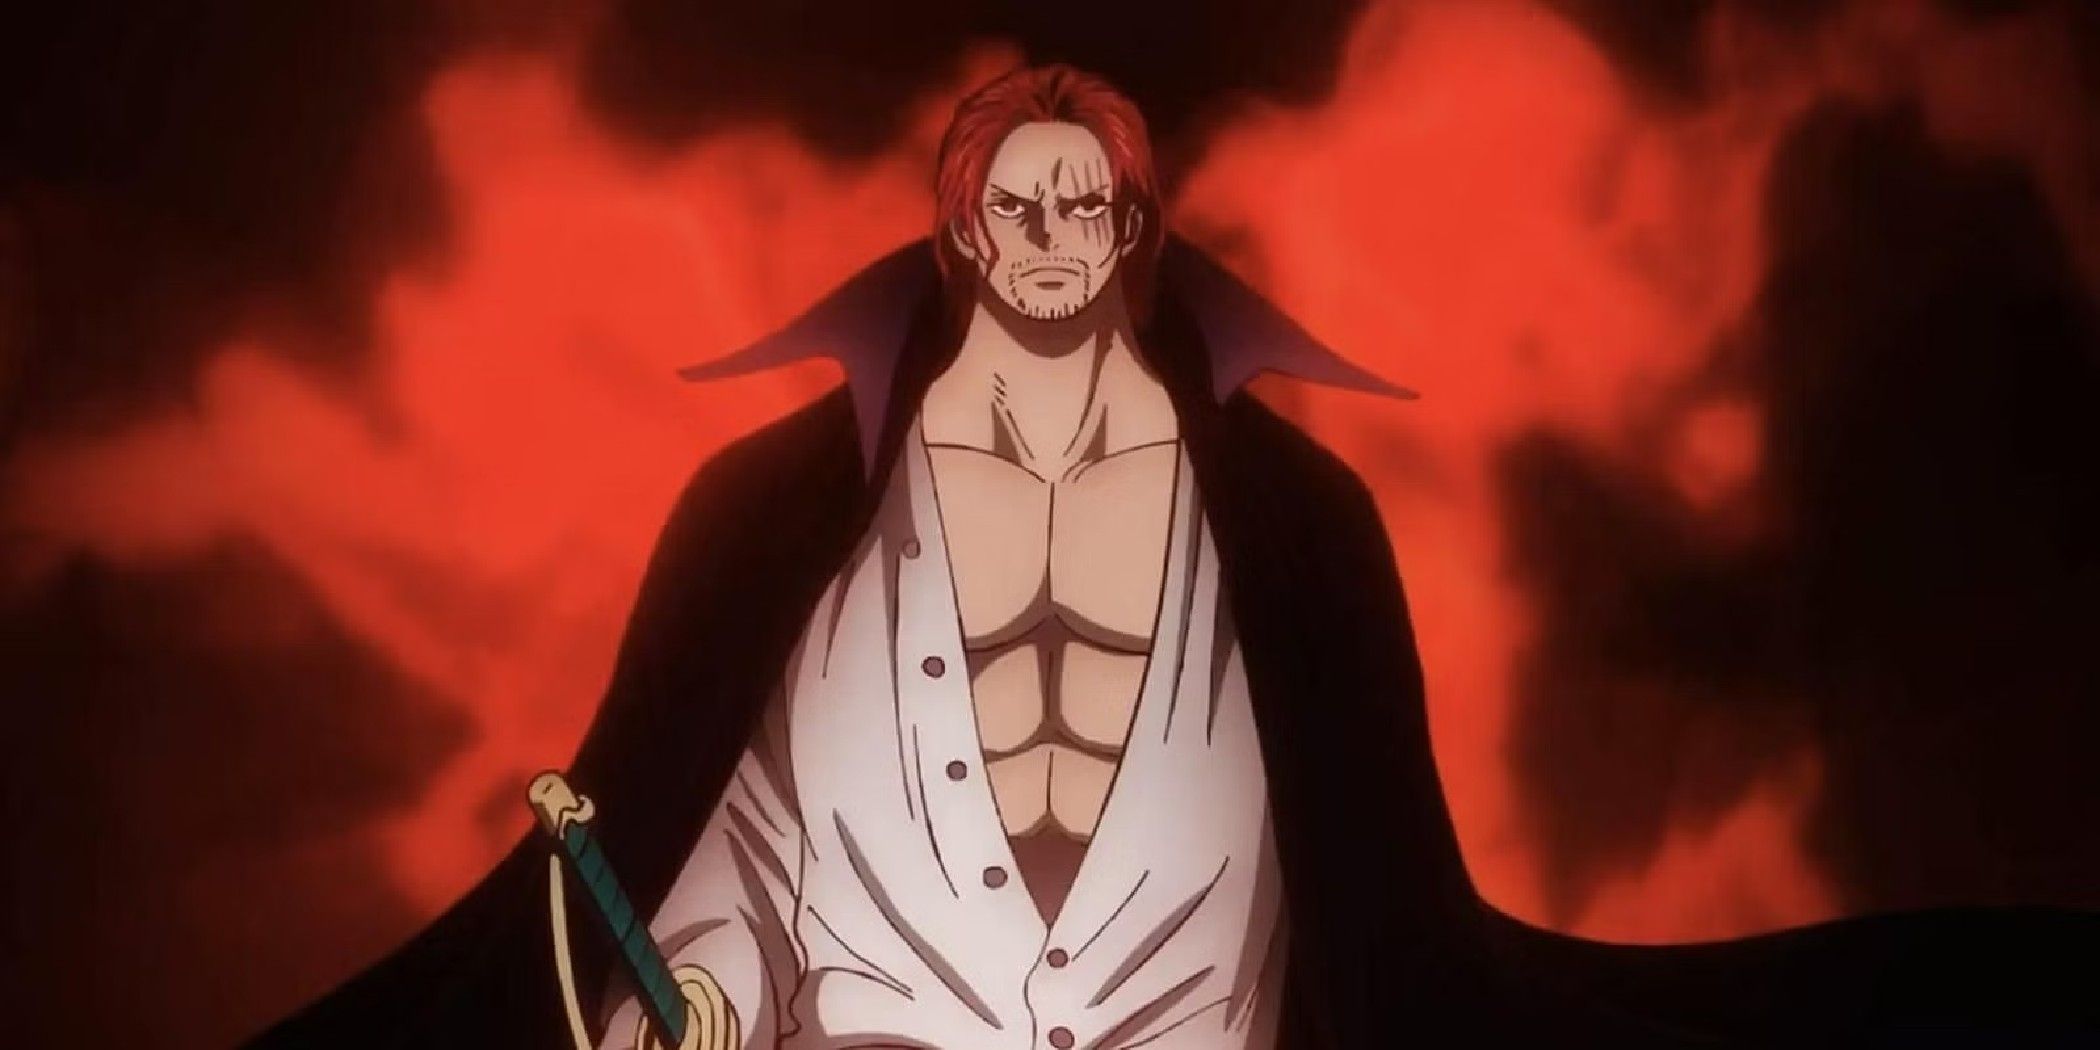 Shanks in one piece looking determined against a red background